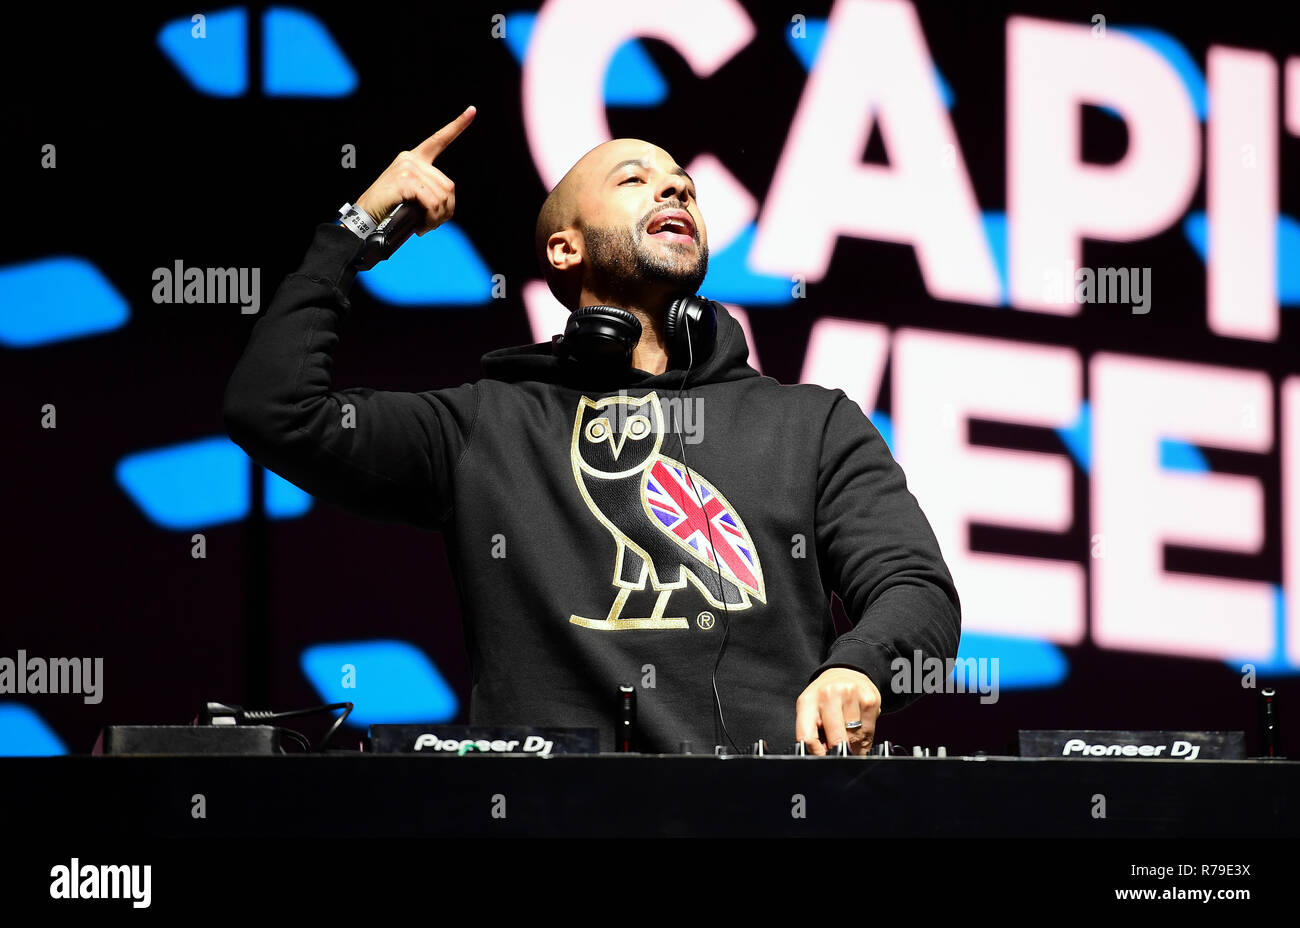 Marvin Humes on stage during day one of Capital's Jingle Bell Ball with Coca-Cola at London's O2 Arena. PRESS ASSOCIATION Photo. Night one of the event saw performances from Liam Payne, Rita Ora, Ellie Goulding and David Guetta. Picture date: Saturday December 8, 2018. See PA story SHOWBIZ Jingle Bell. Photo credit should read: Ian West/PA Wire on stage during day one of Capital's Jingle Bell Ball with Coca-Cola at London's O2 Arena. PRESS ASSOCIATION Photo. Night one of the event saw performances from Liam Payne, Rita Ora, Ellie Goulding and David Guetta. Picture date: Saturday December 8, 20 Stock Photo